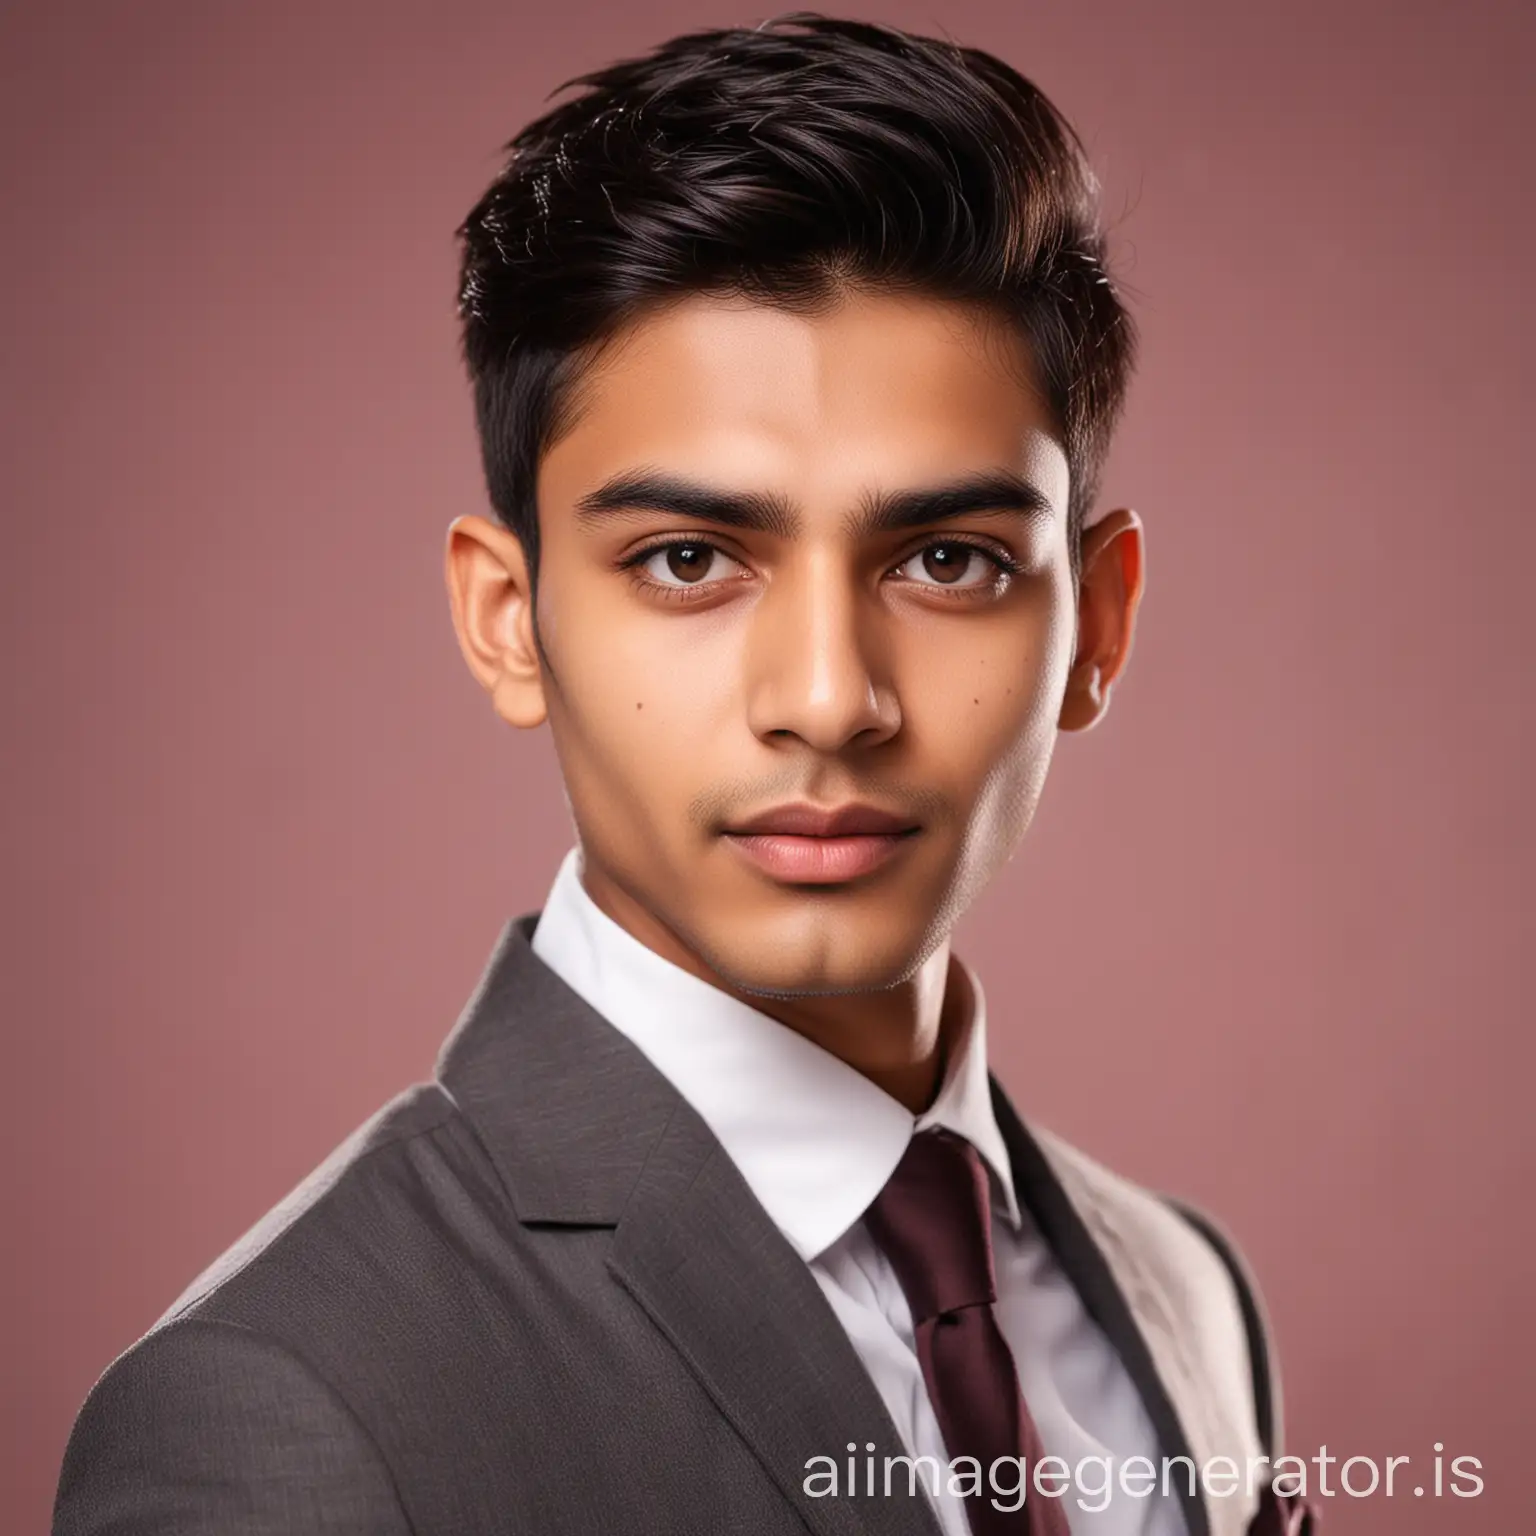 Indian-Teen-Male-in-Formal-Wear-Poses-for-LinkedIn-Photo-in-Office-Setting